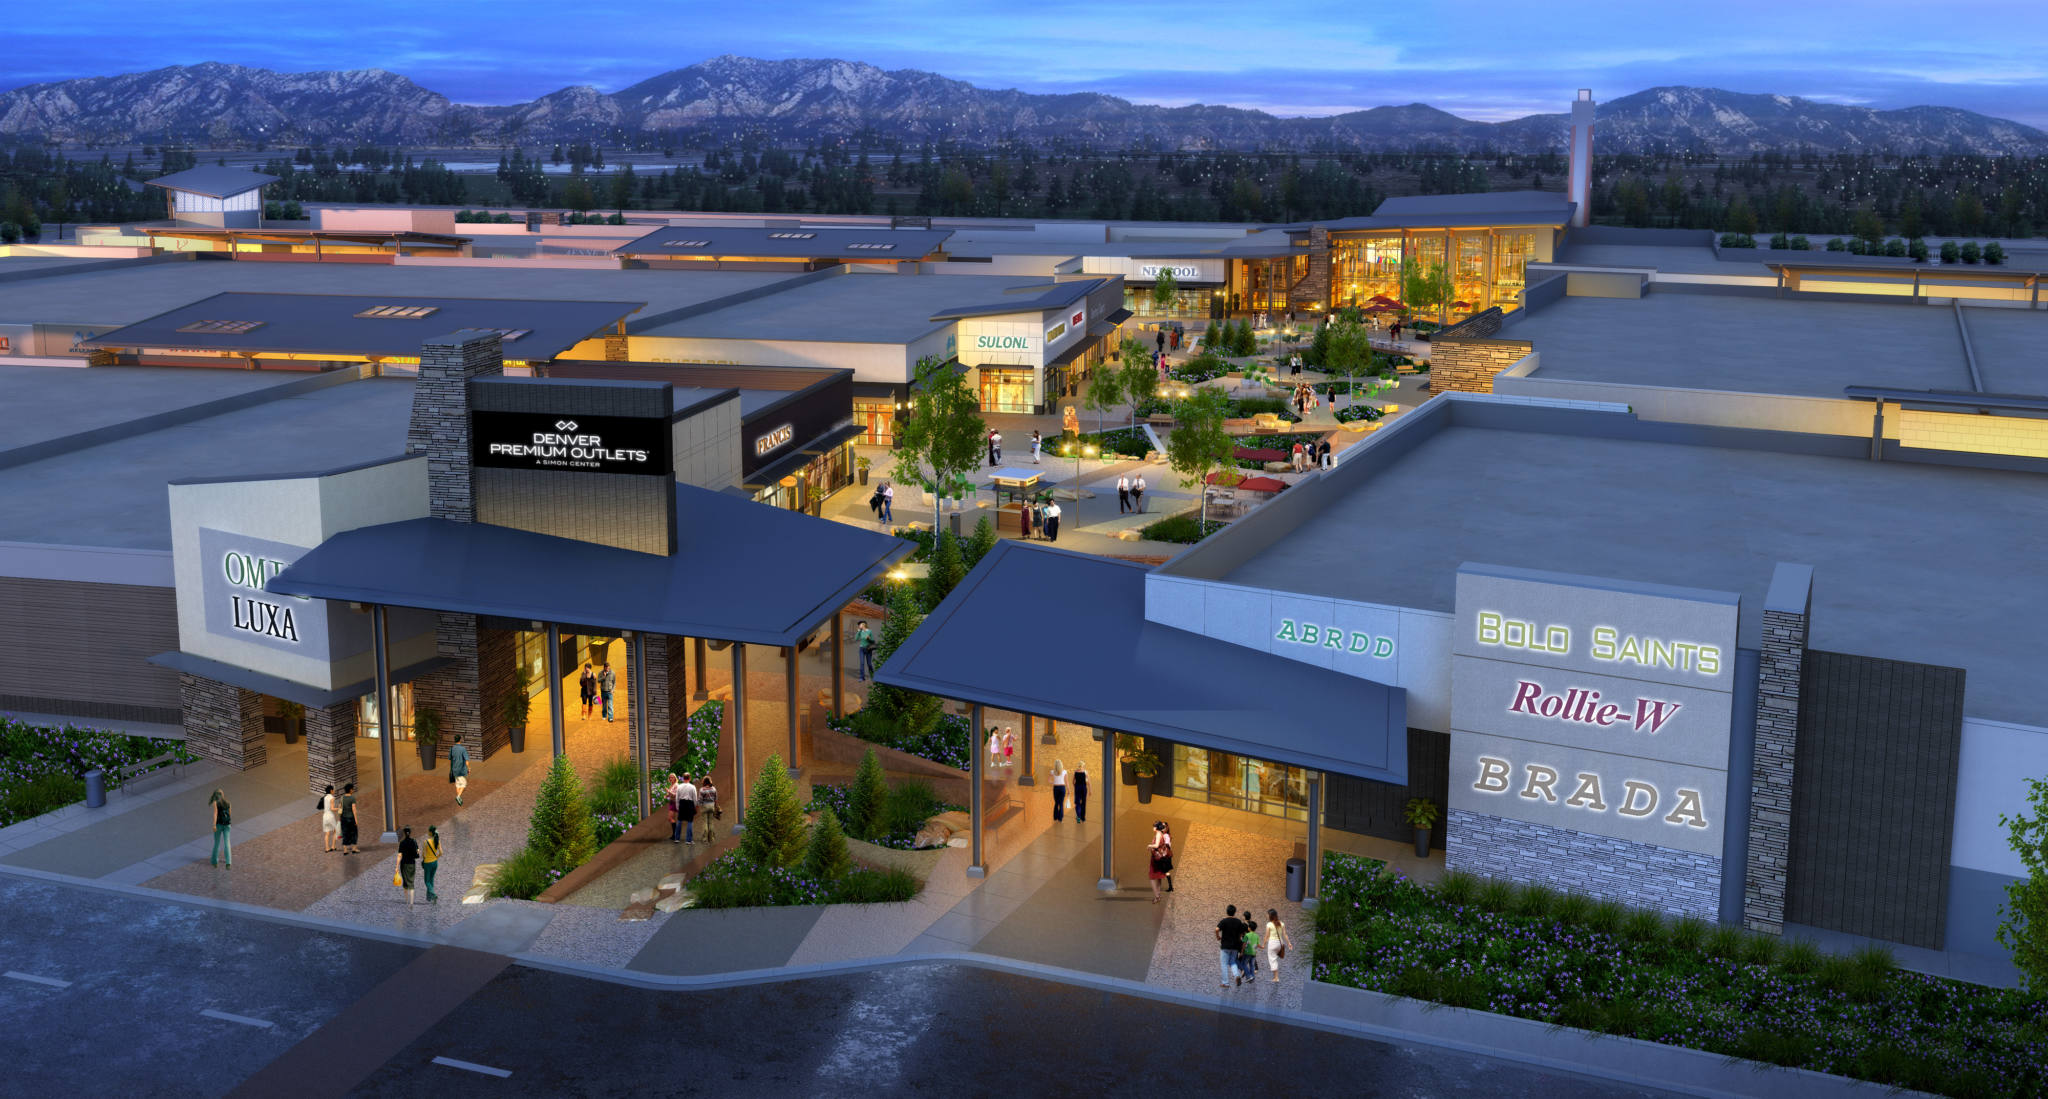 Denver Premium Outlets Grand date September 27, 2018 and confirms additional wave of new stores - Thornton